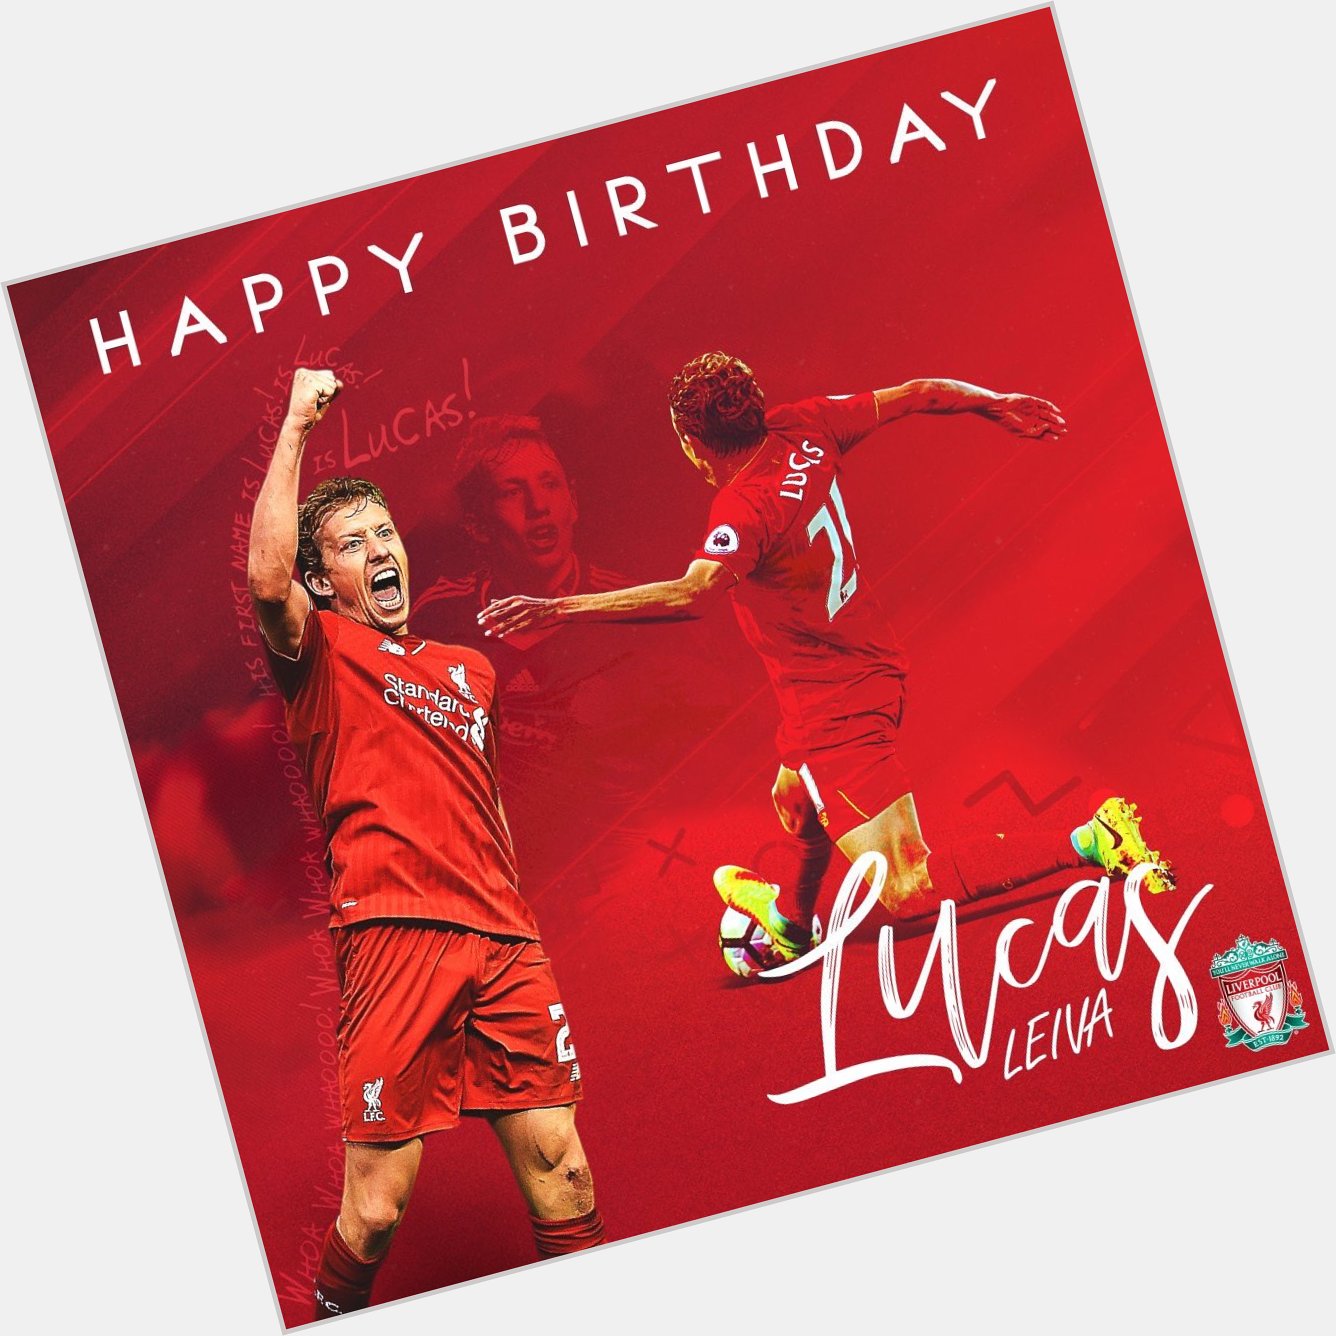 Happy Birthday Lucas Leiva miss you playing for Liverpool YNWA    